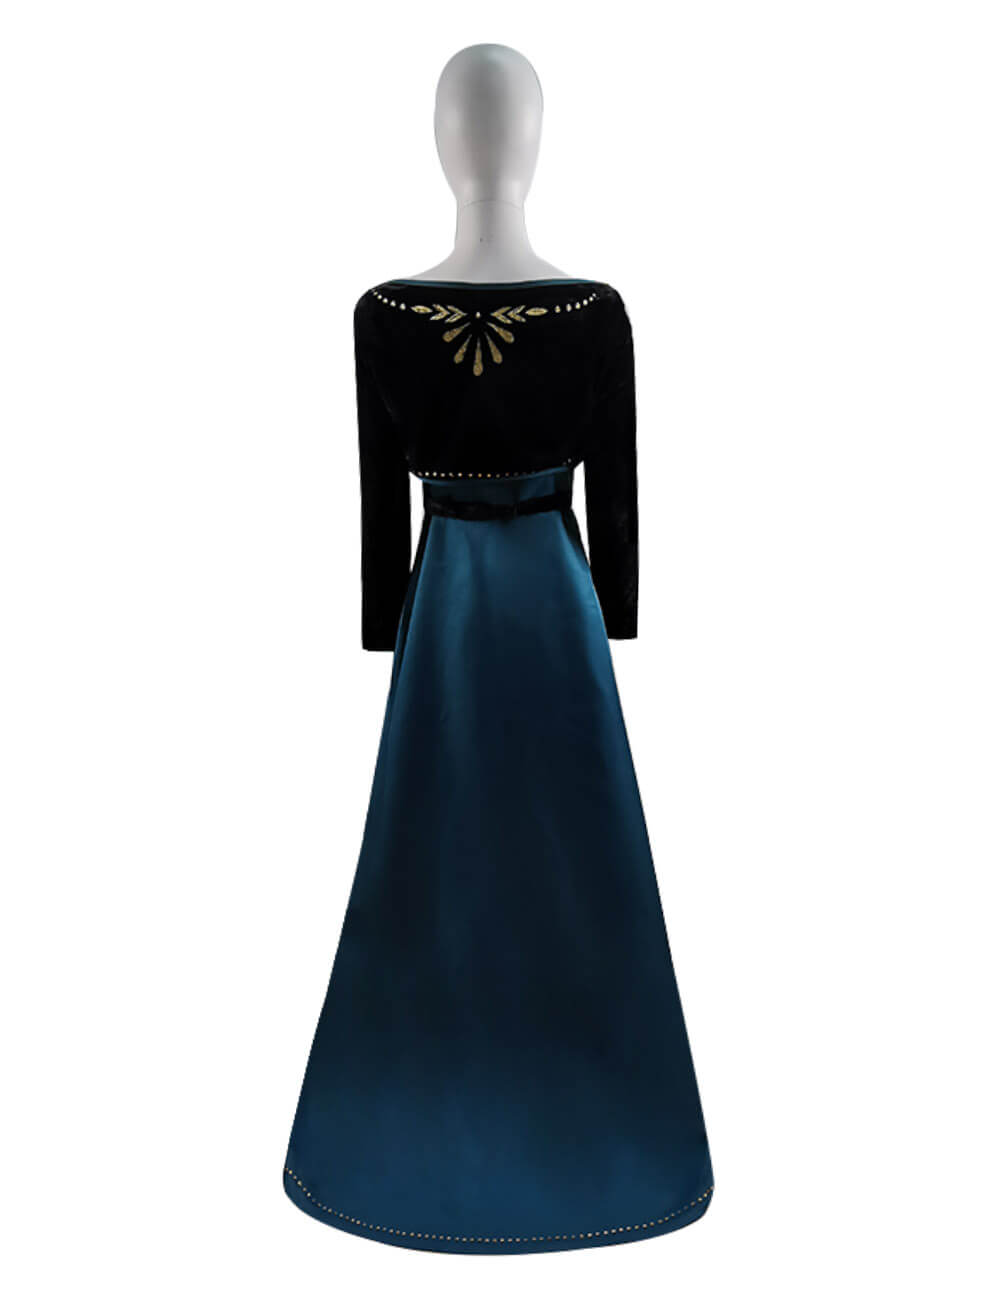 Disney Frozen 2 Anna Queen Dress Cosplay Costume For Adults ACcosplay - ACcosplay